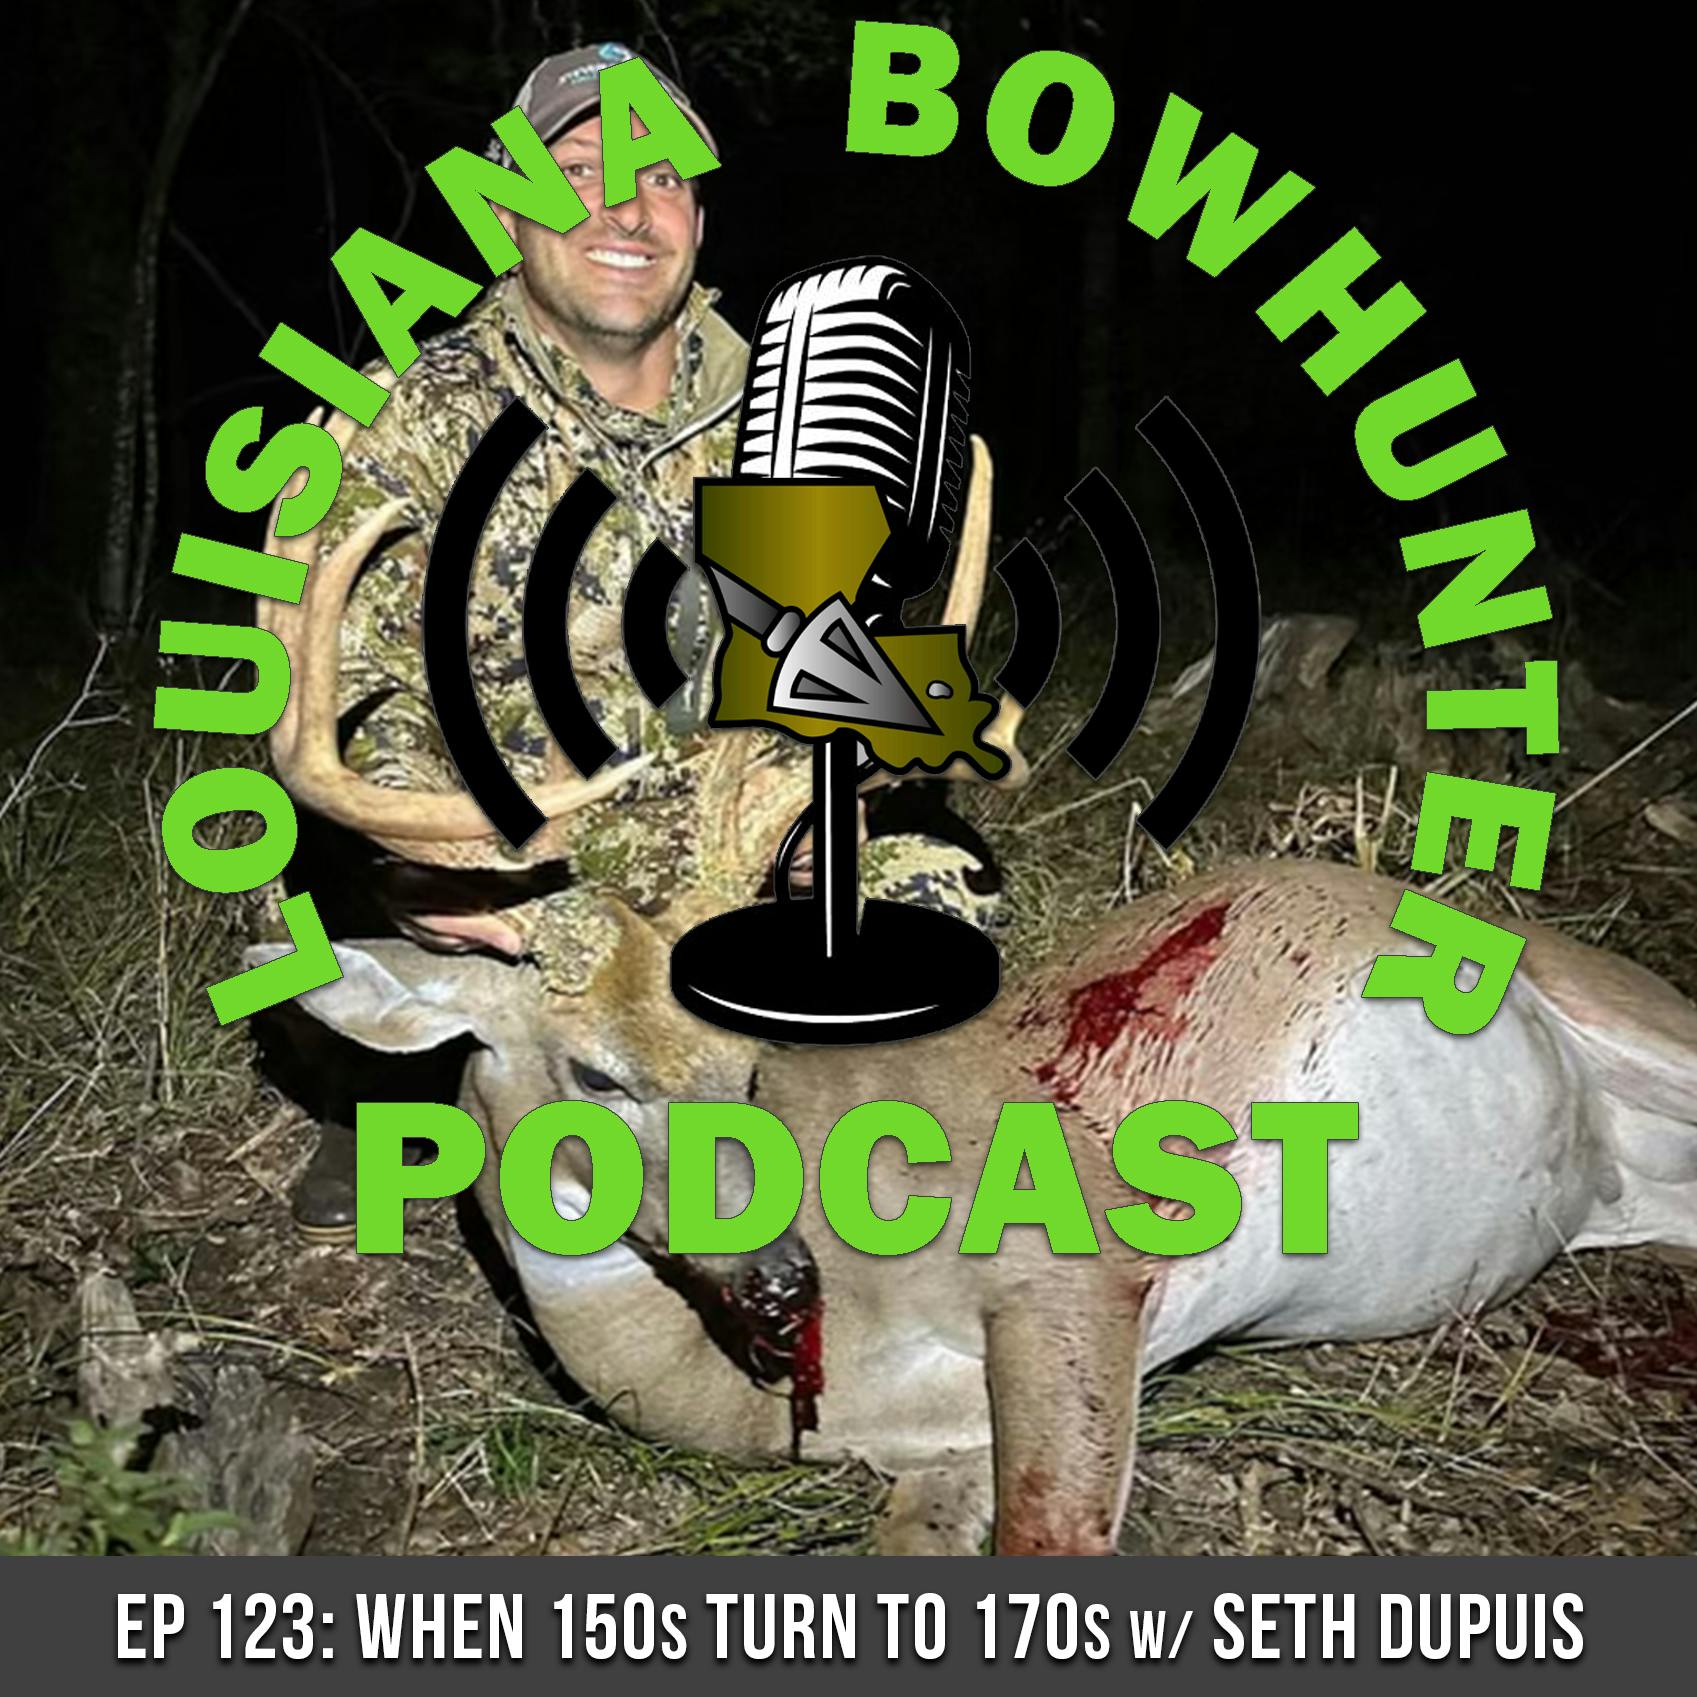 Episode 123: When 150s turn to 170s w/Seth Dupuis